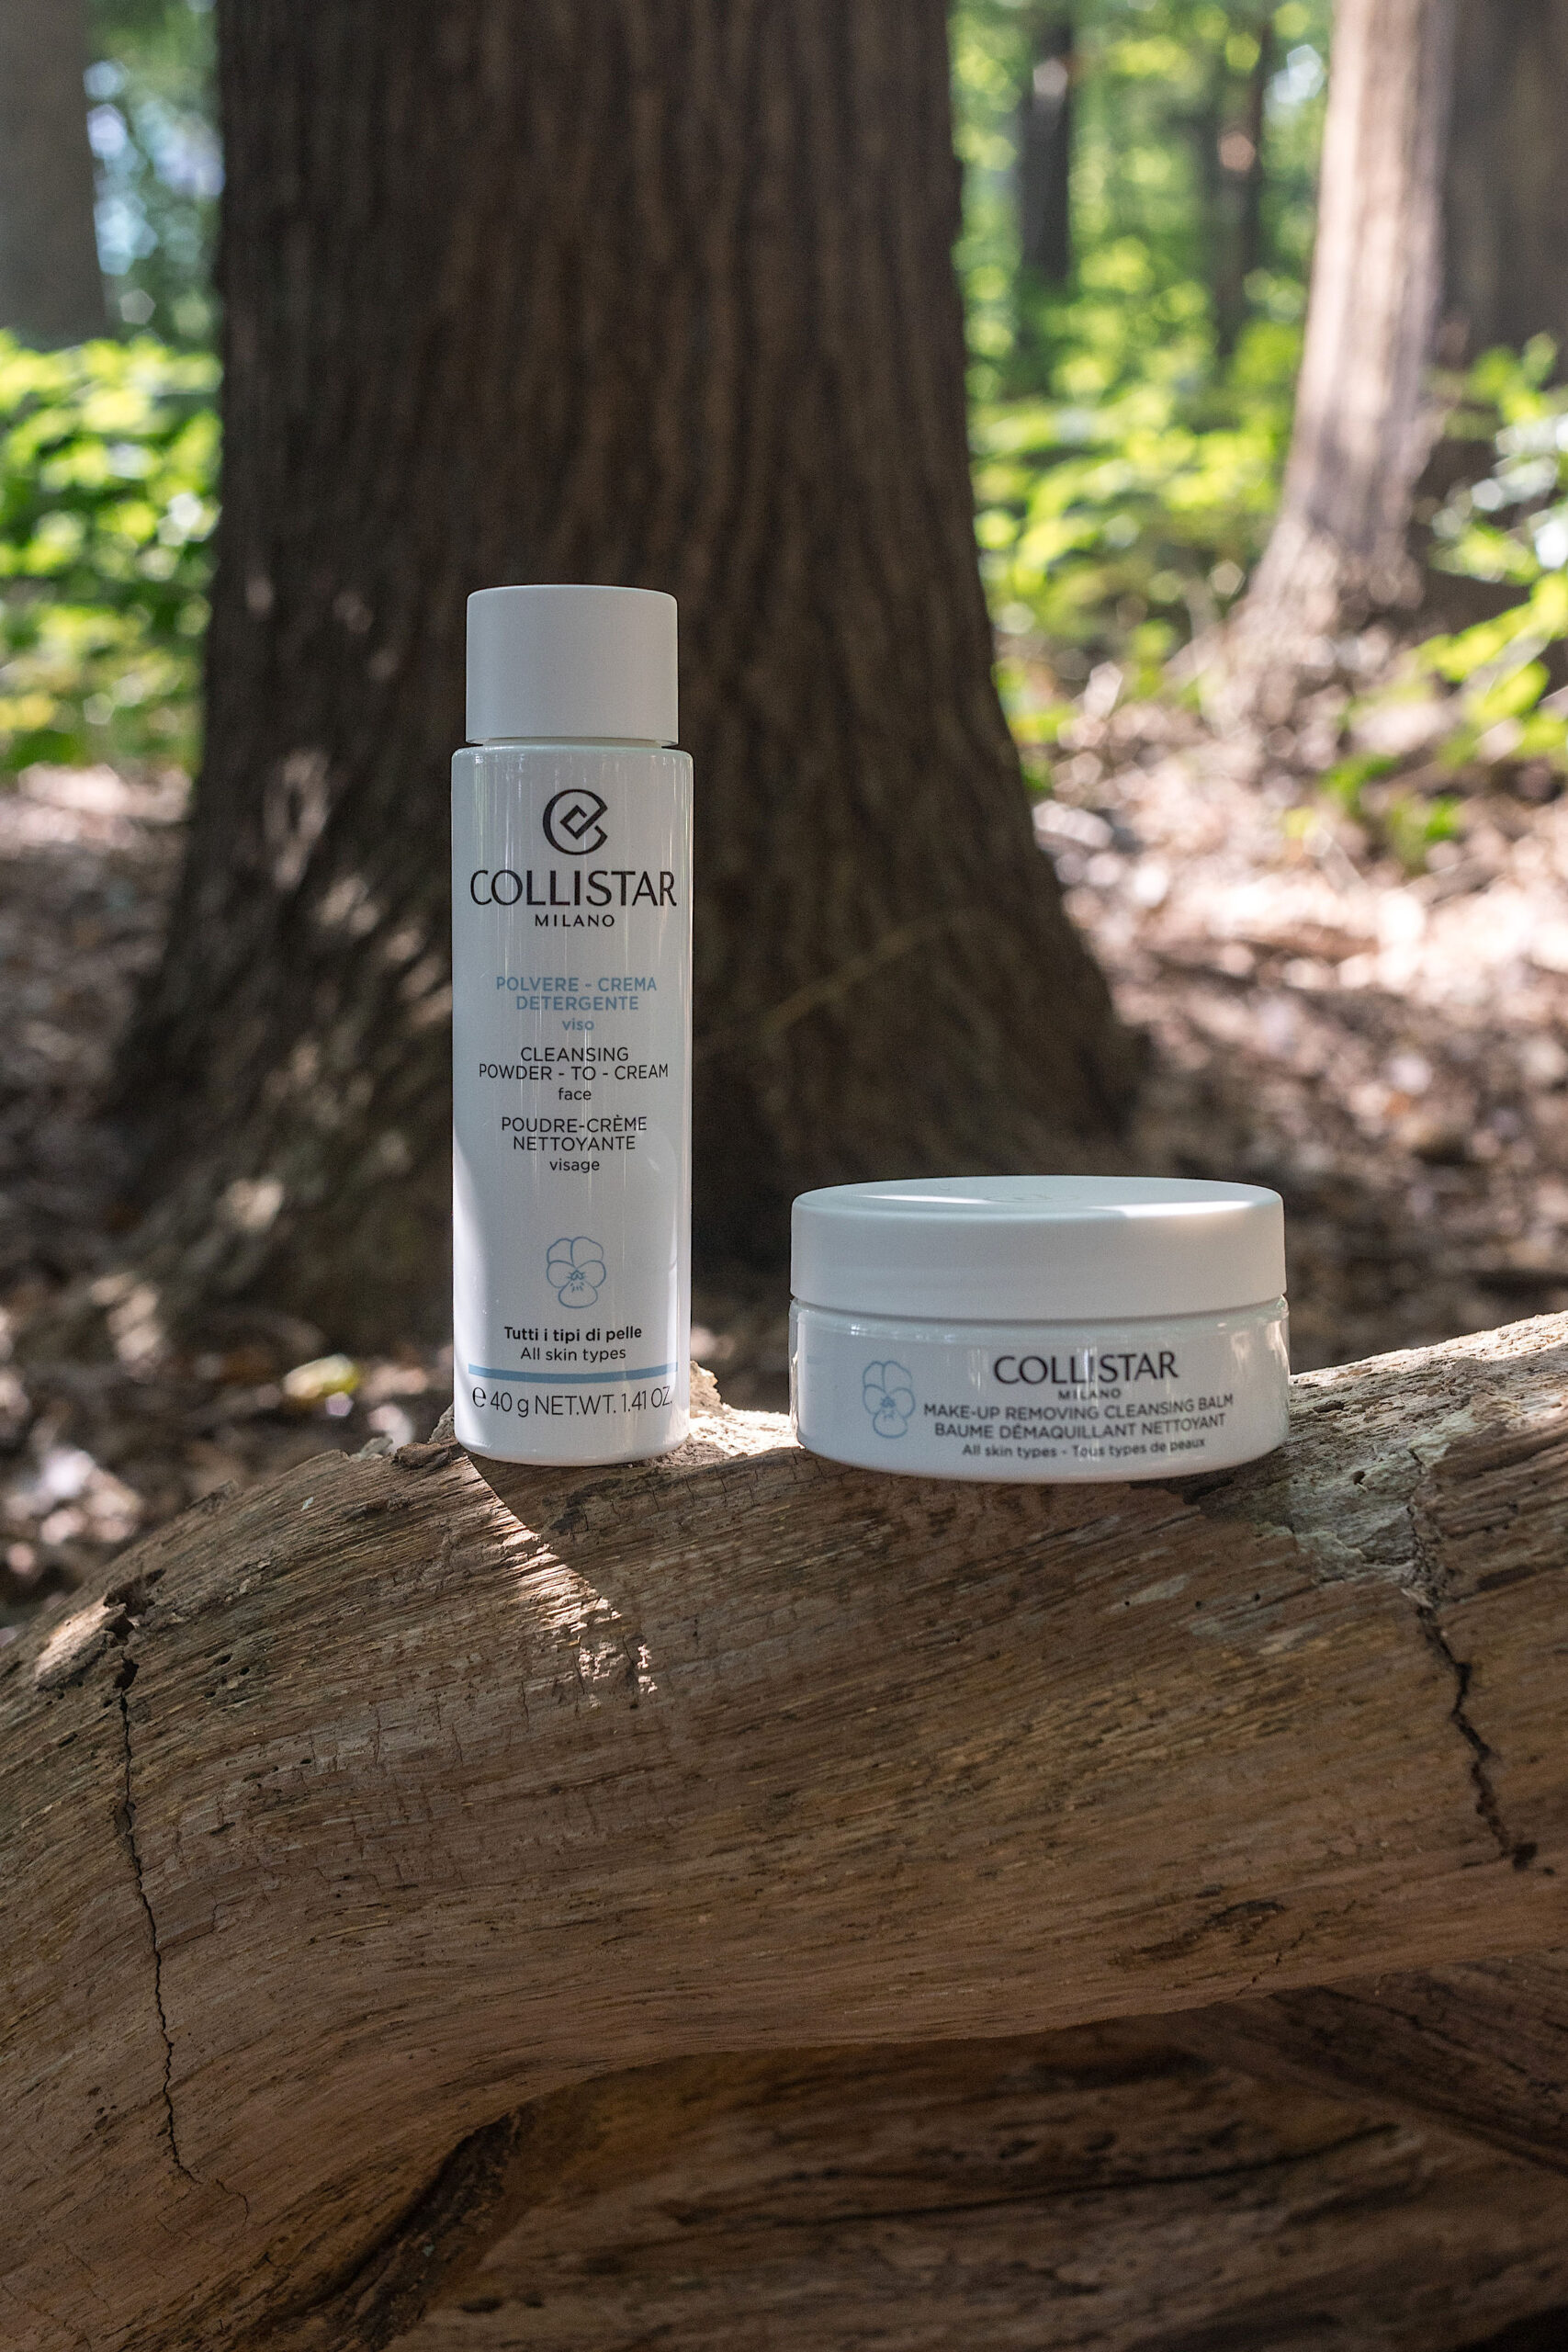 Collistar Make-up removing cleansing balm review